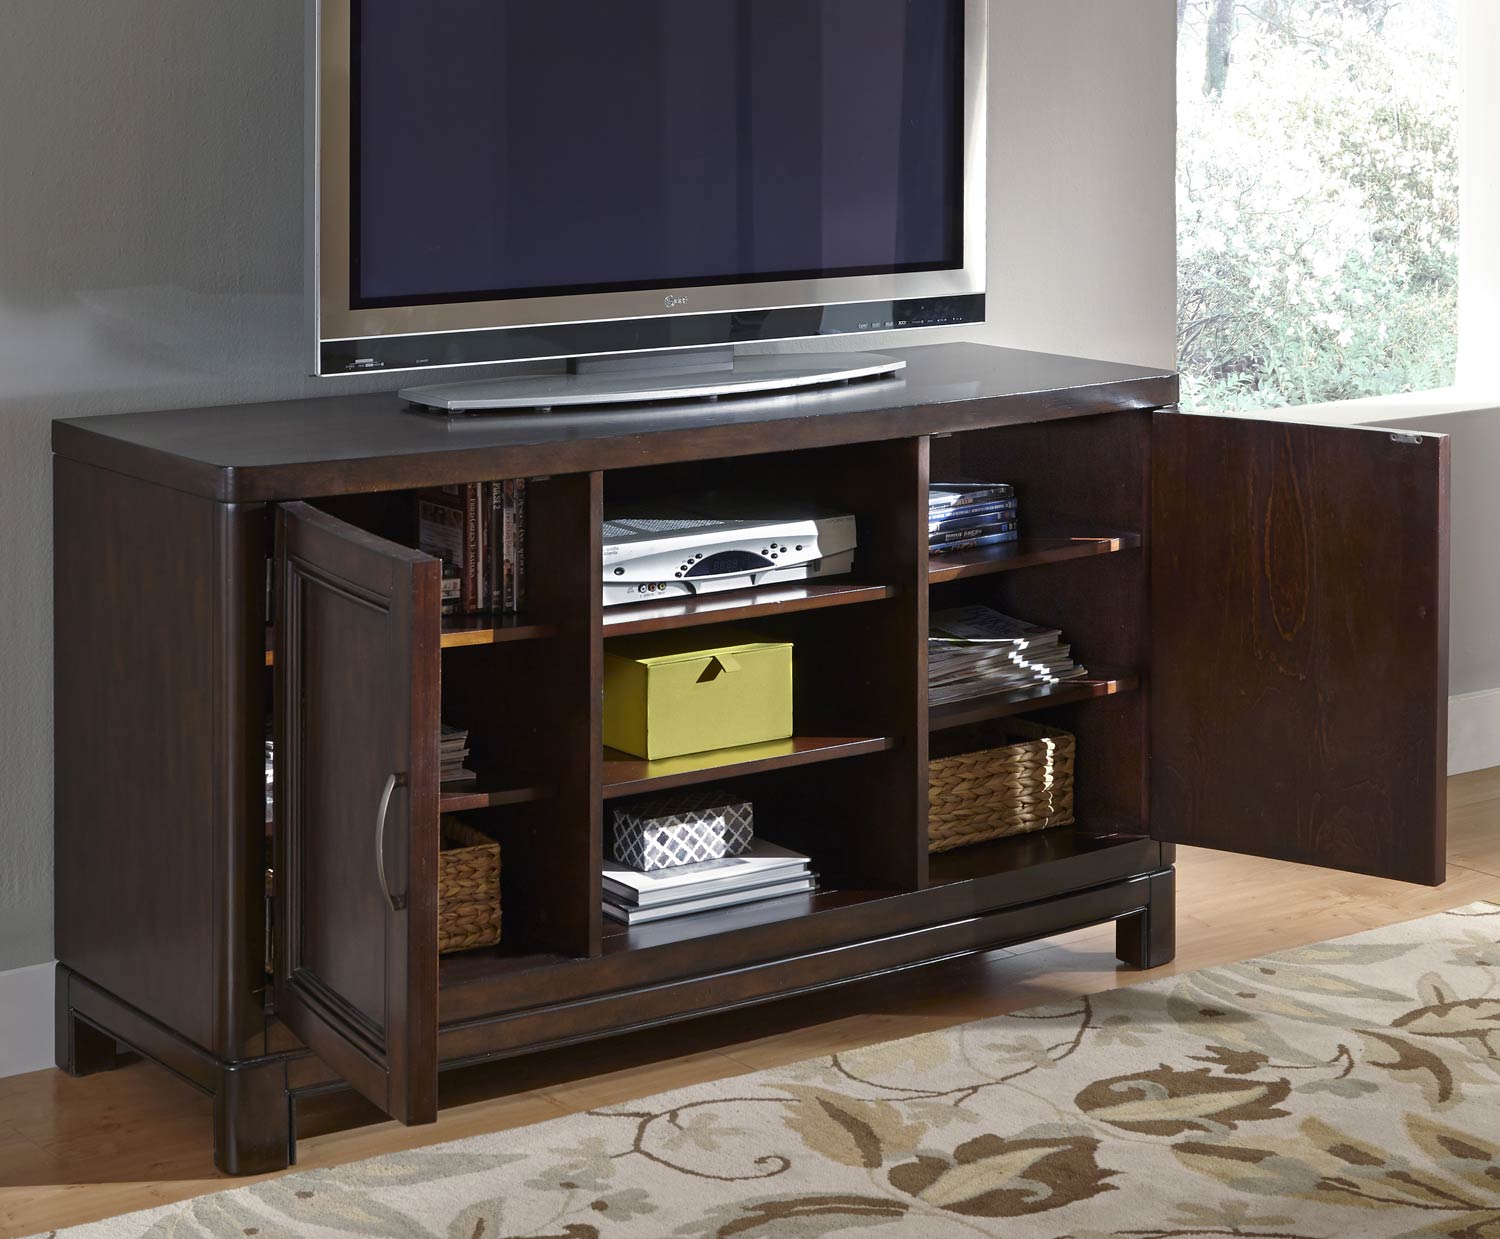 Home Styles Crescent Hill 56 Inch TV Stand - Two-tone tortoise shell